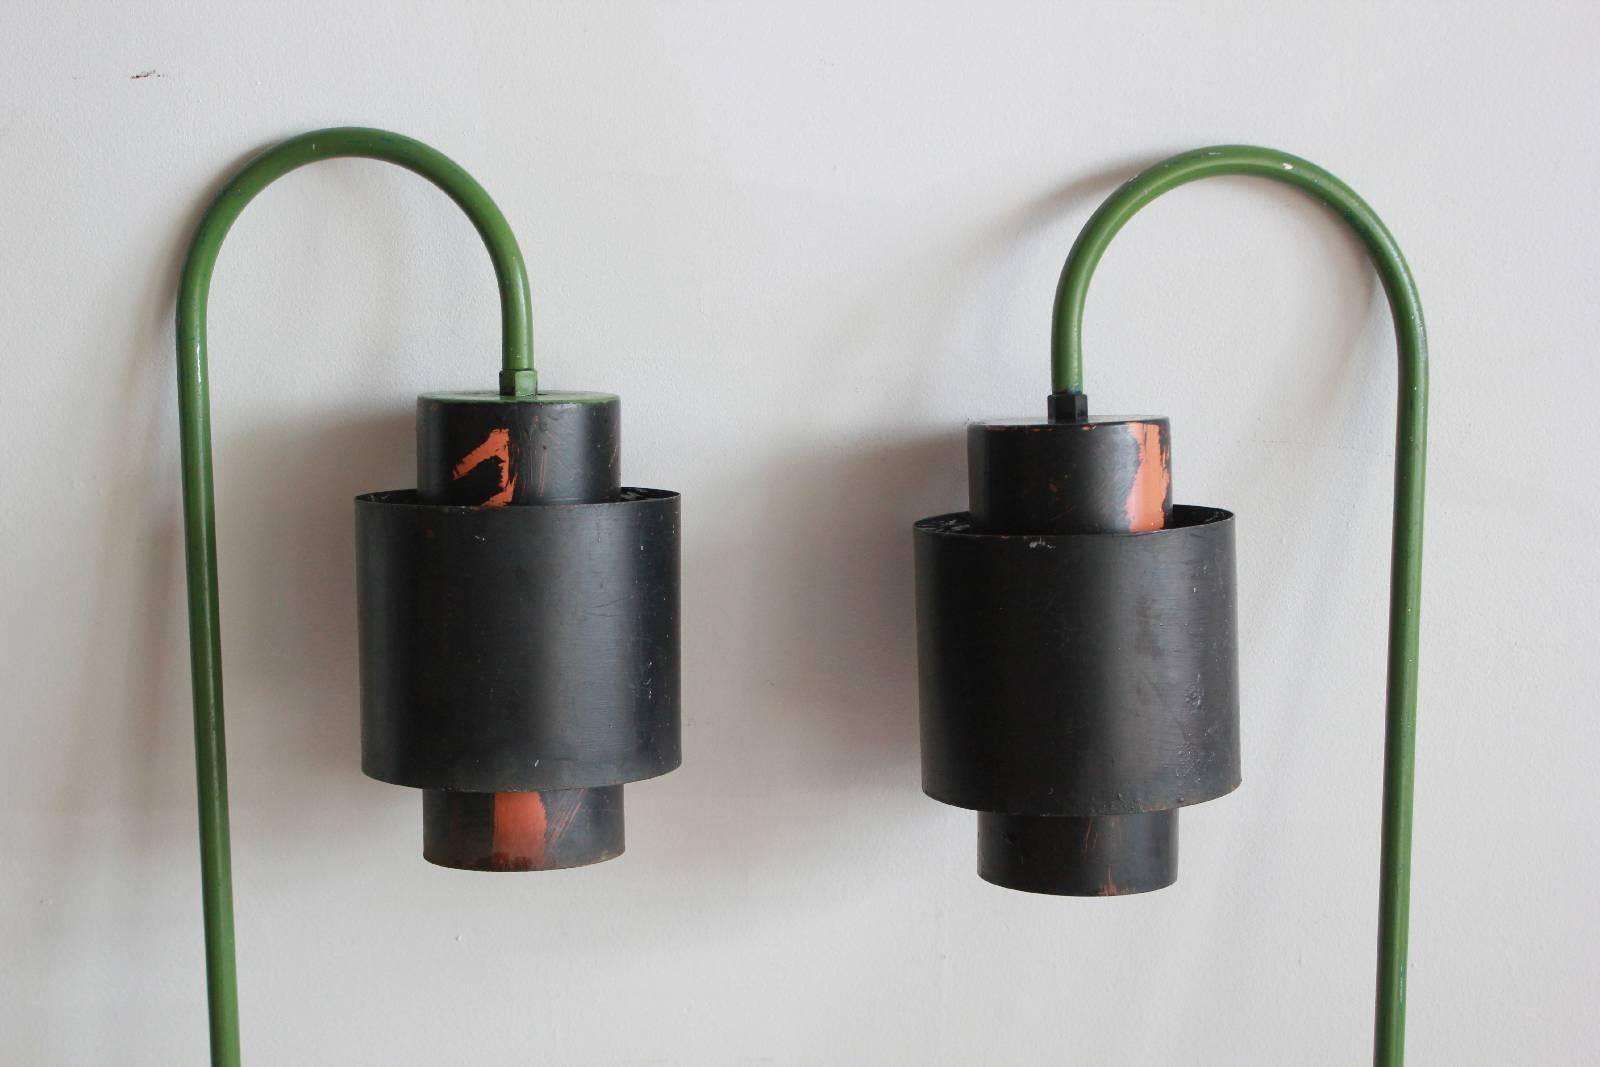 Pair of over arching green and black painted metal outdoor lanterns.